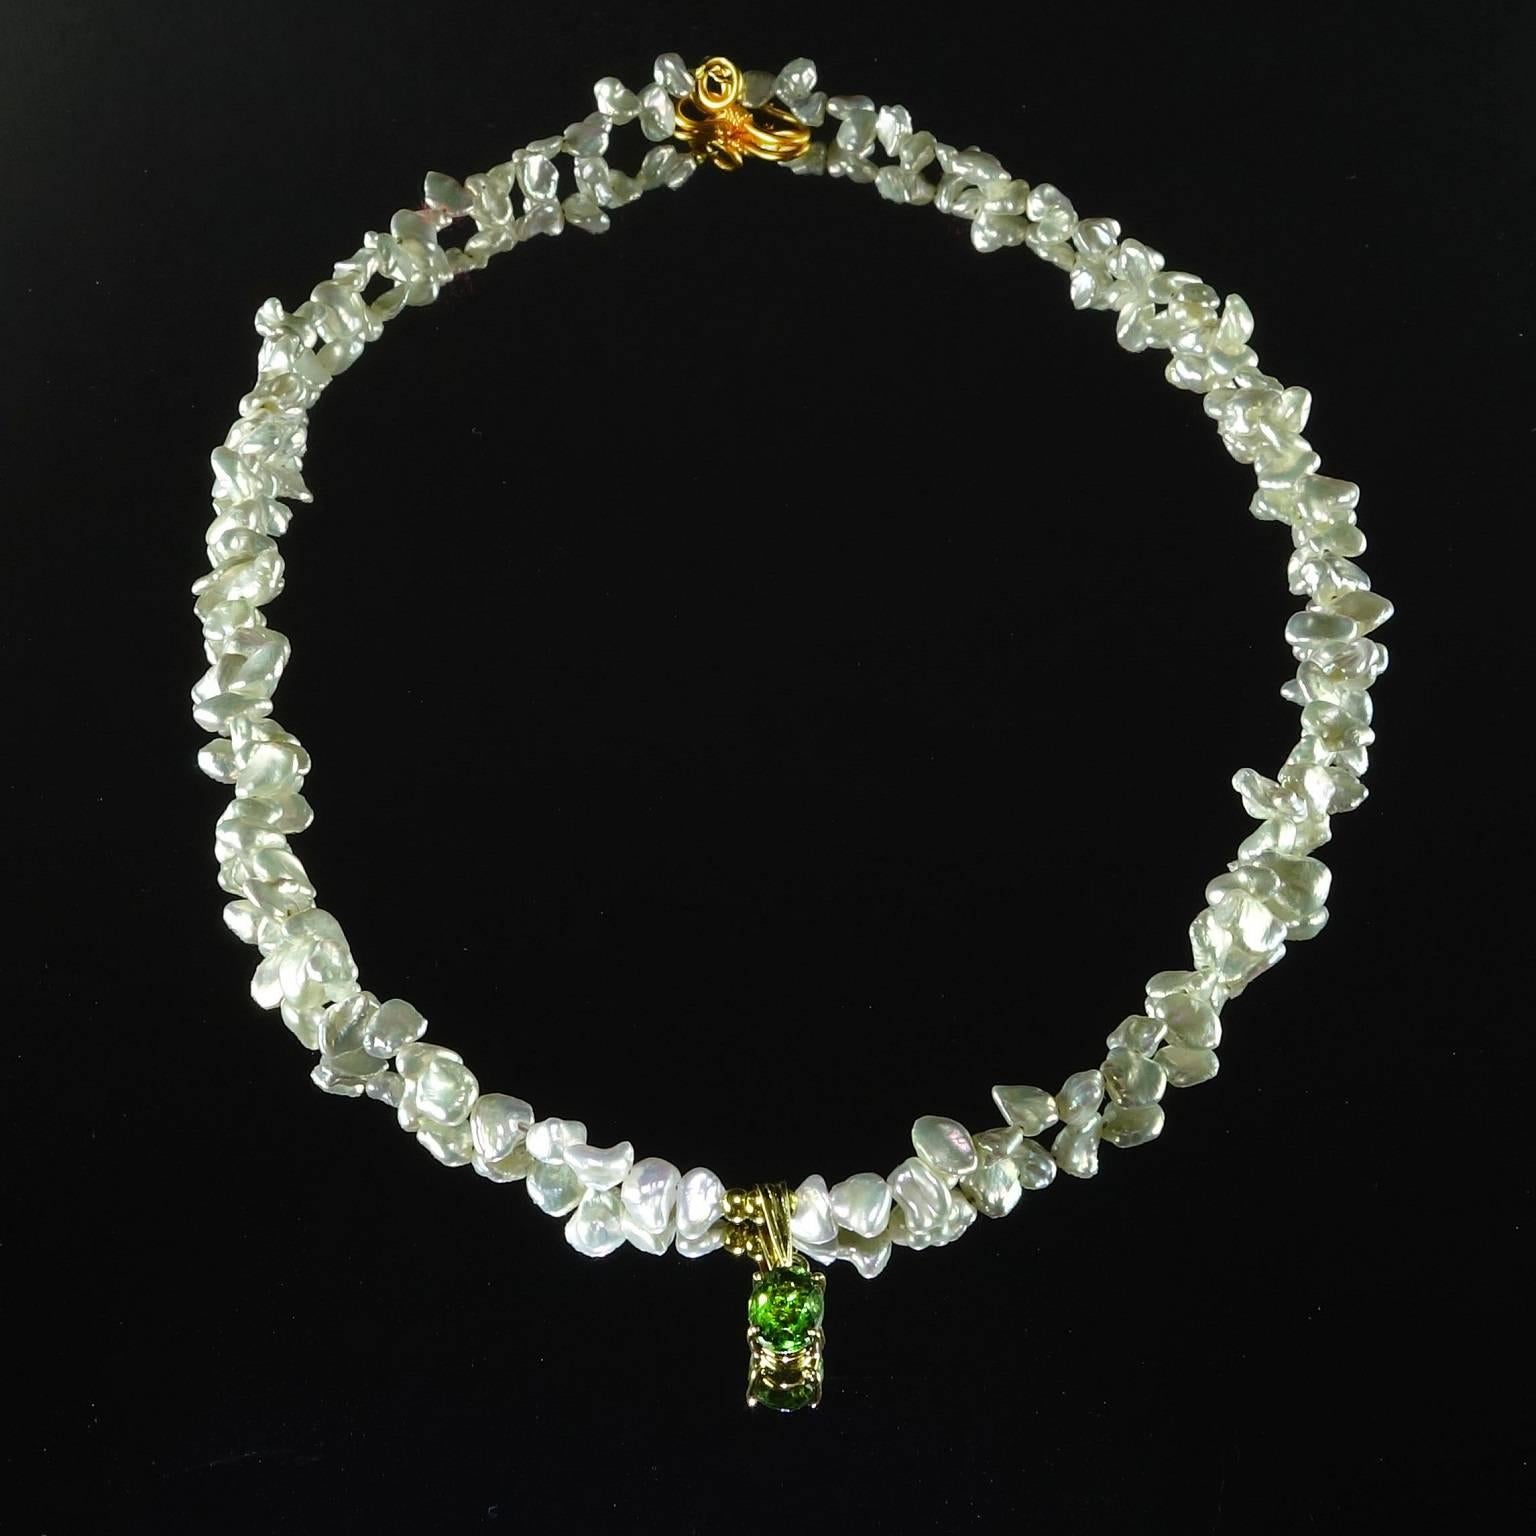 AJD Pearl Necklace with Green Tourmaline Pendant 1